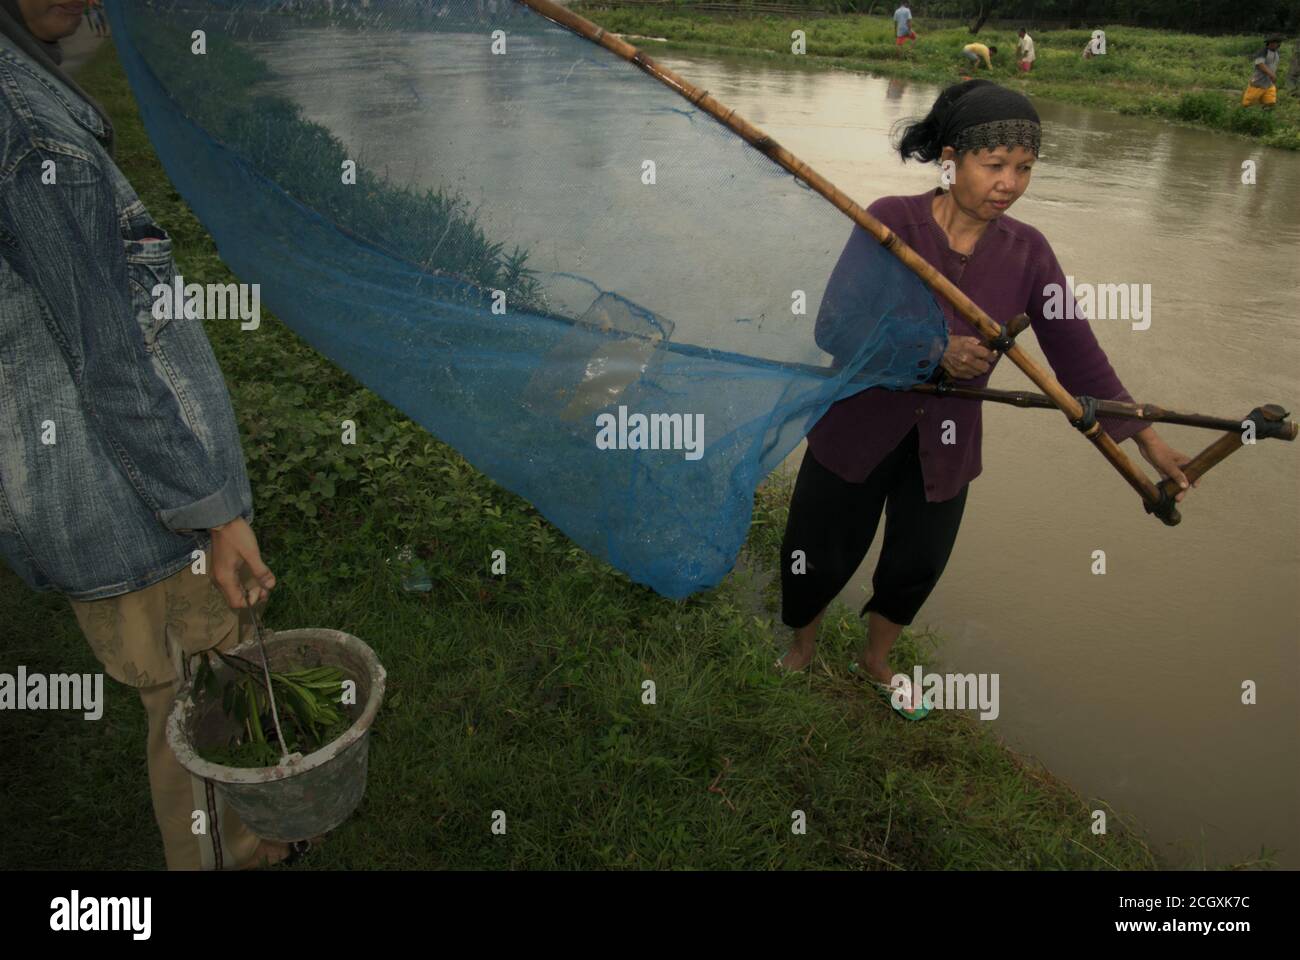 A woman handling a pushnet as she stands on the bank of an irrigation canal in Karawang regency, West Java province, Indonesia. Stock Photo